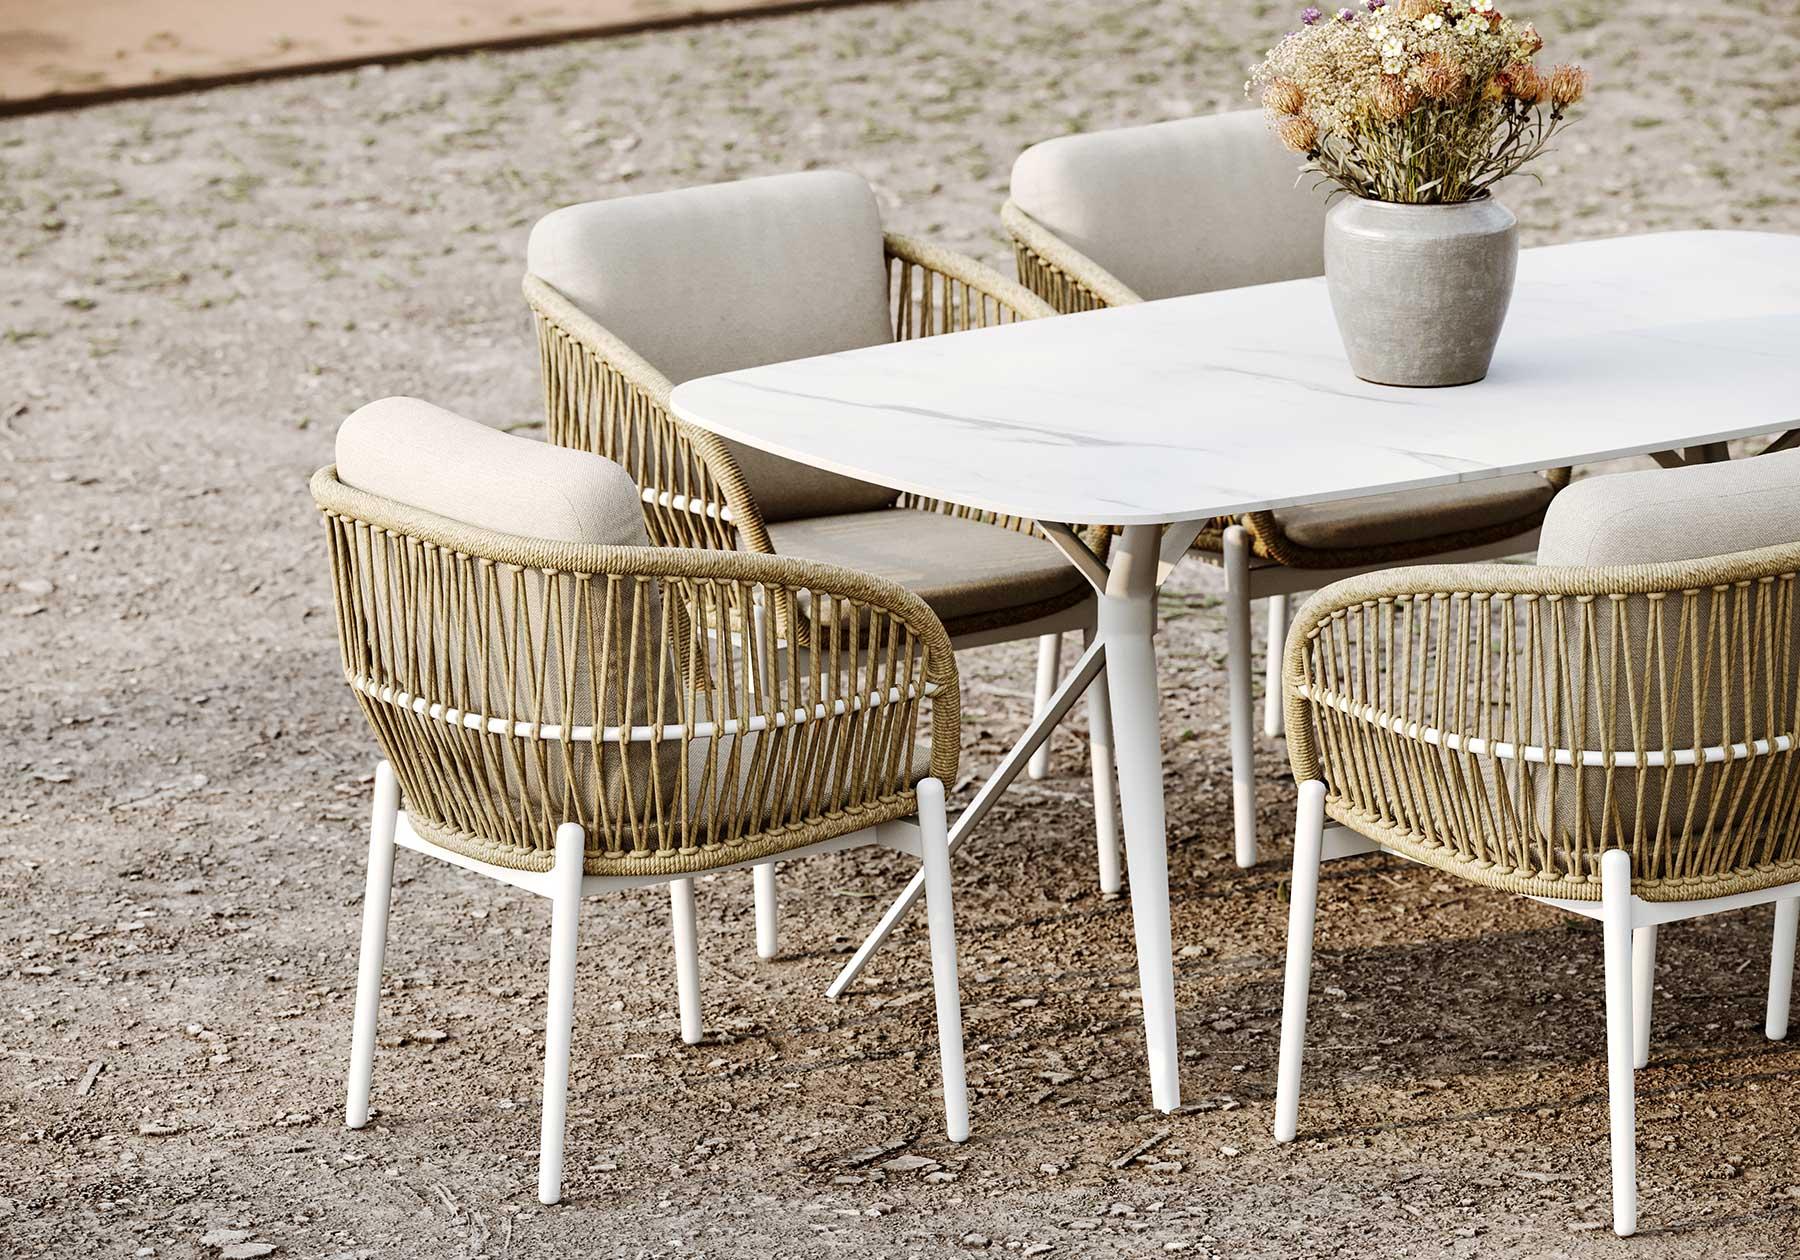 Gemma-pike is an aluminum and wicker garden chair.?

The Gemma-pike Collection is a powerful sketch, synthesizes its rounded lines and comfort, it incorporates the power of contrast into the entire design and deepens the open space experience.?